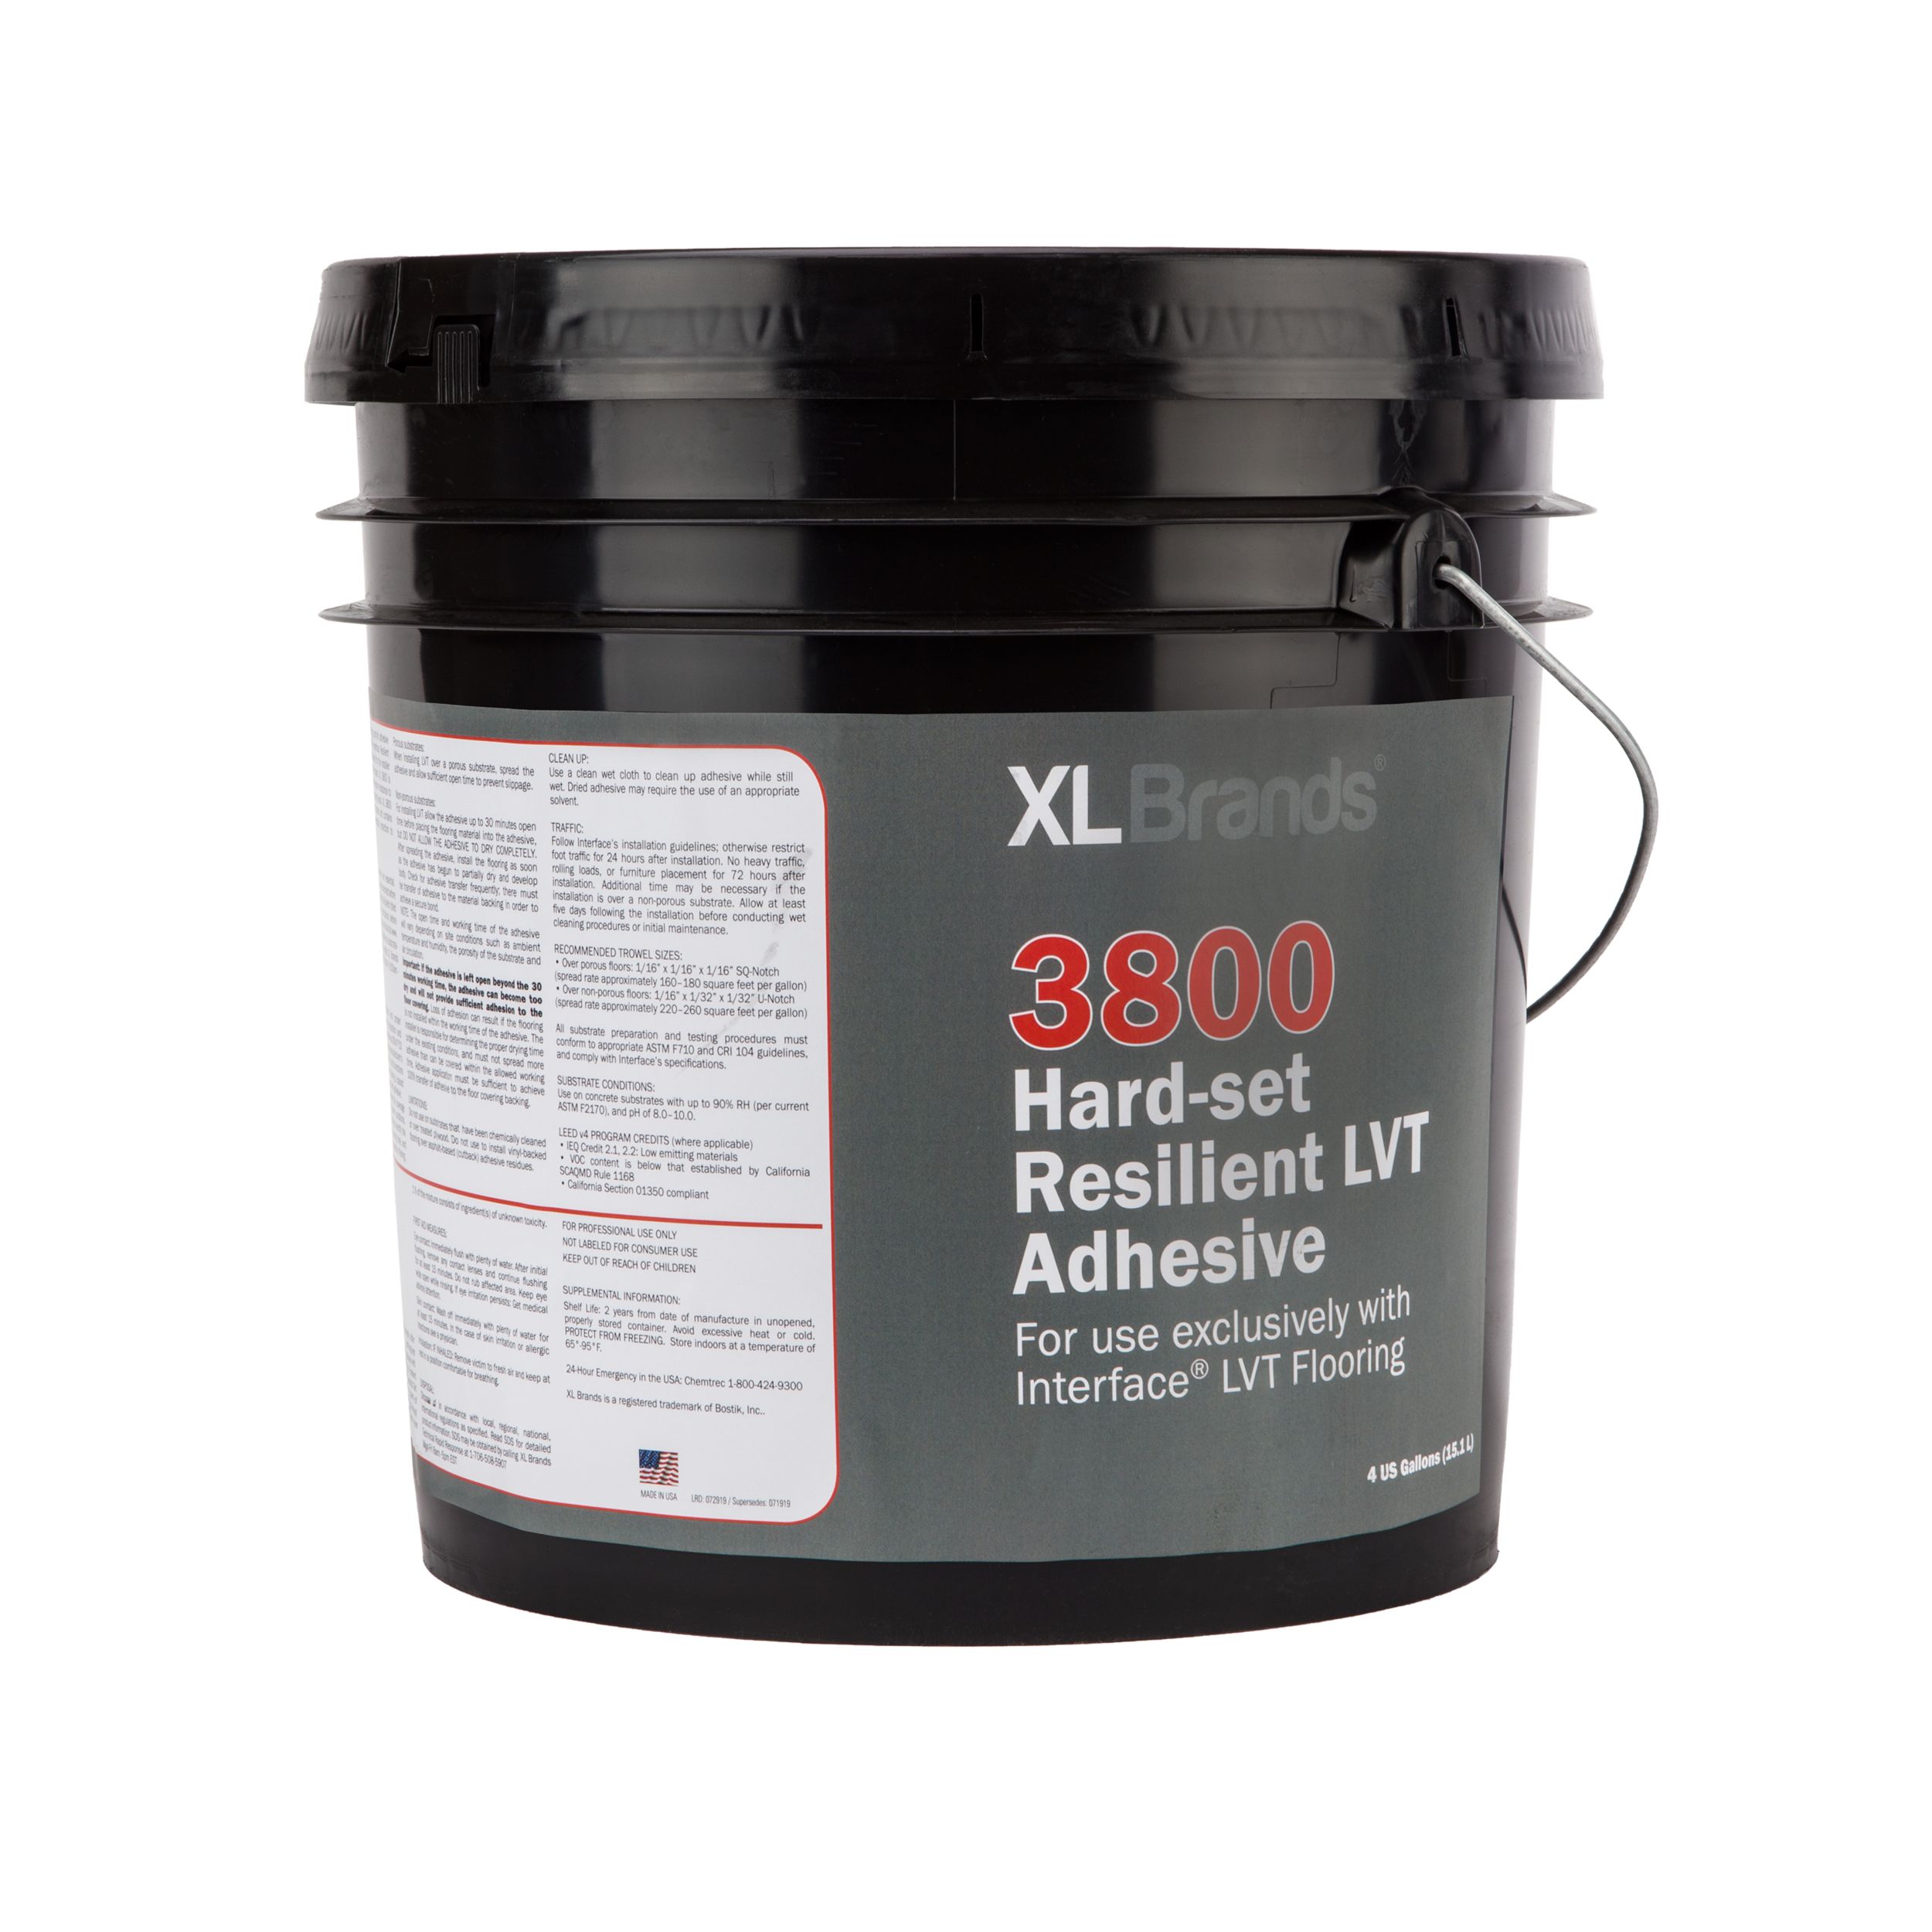 XL Brands 3800 Adhesive - 4 Gal: undefined Resilient Flooring by Interface